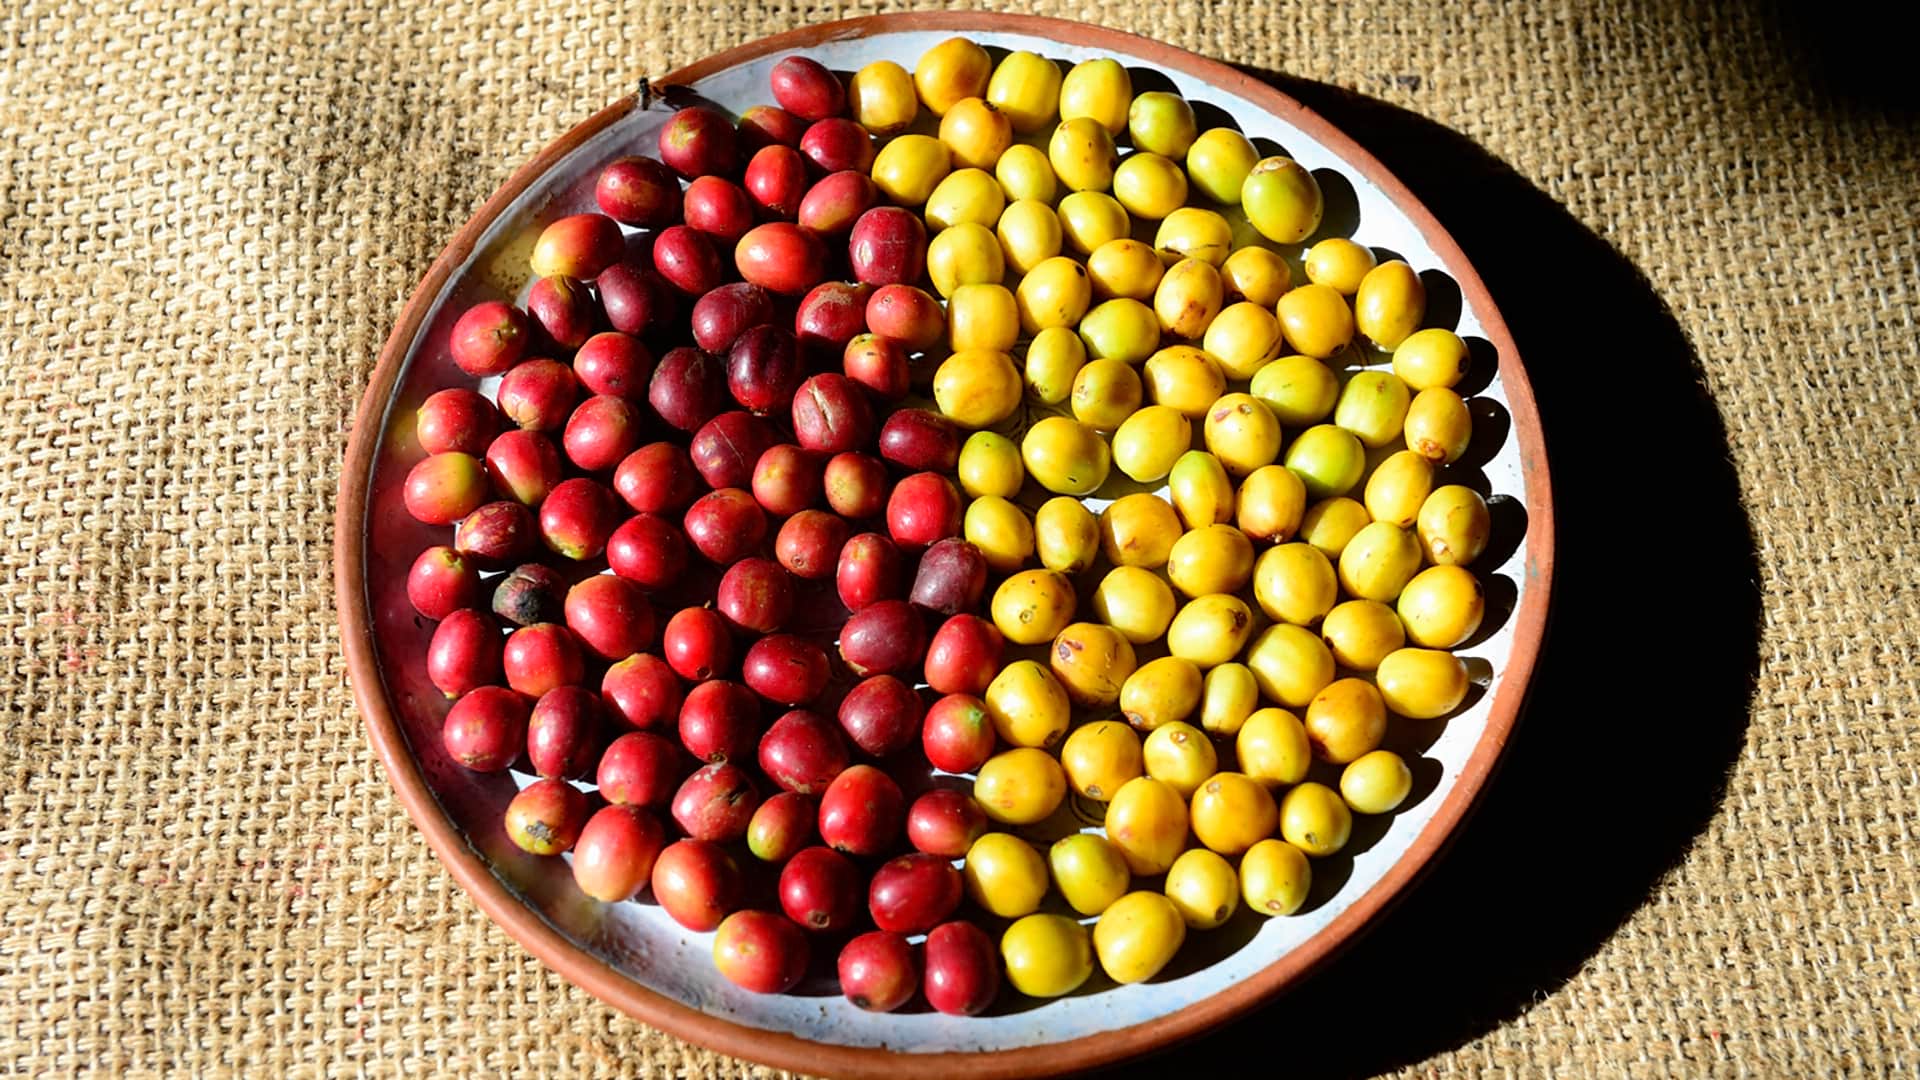 Red and yellow coffee beans - RESPONSible Travel Peru